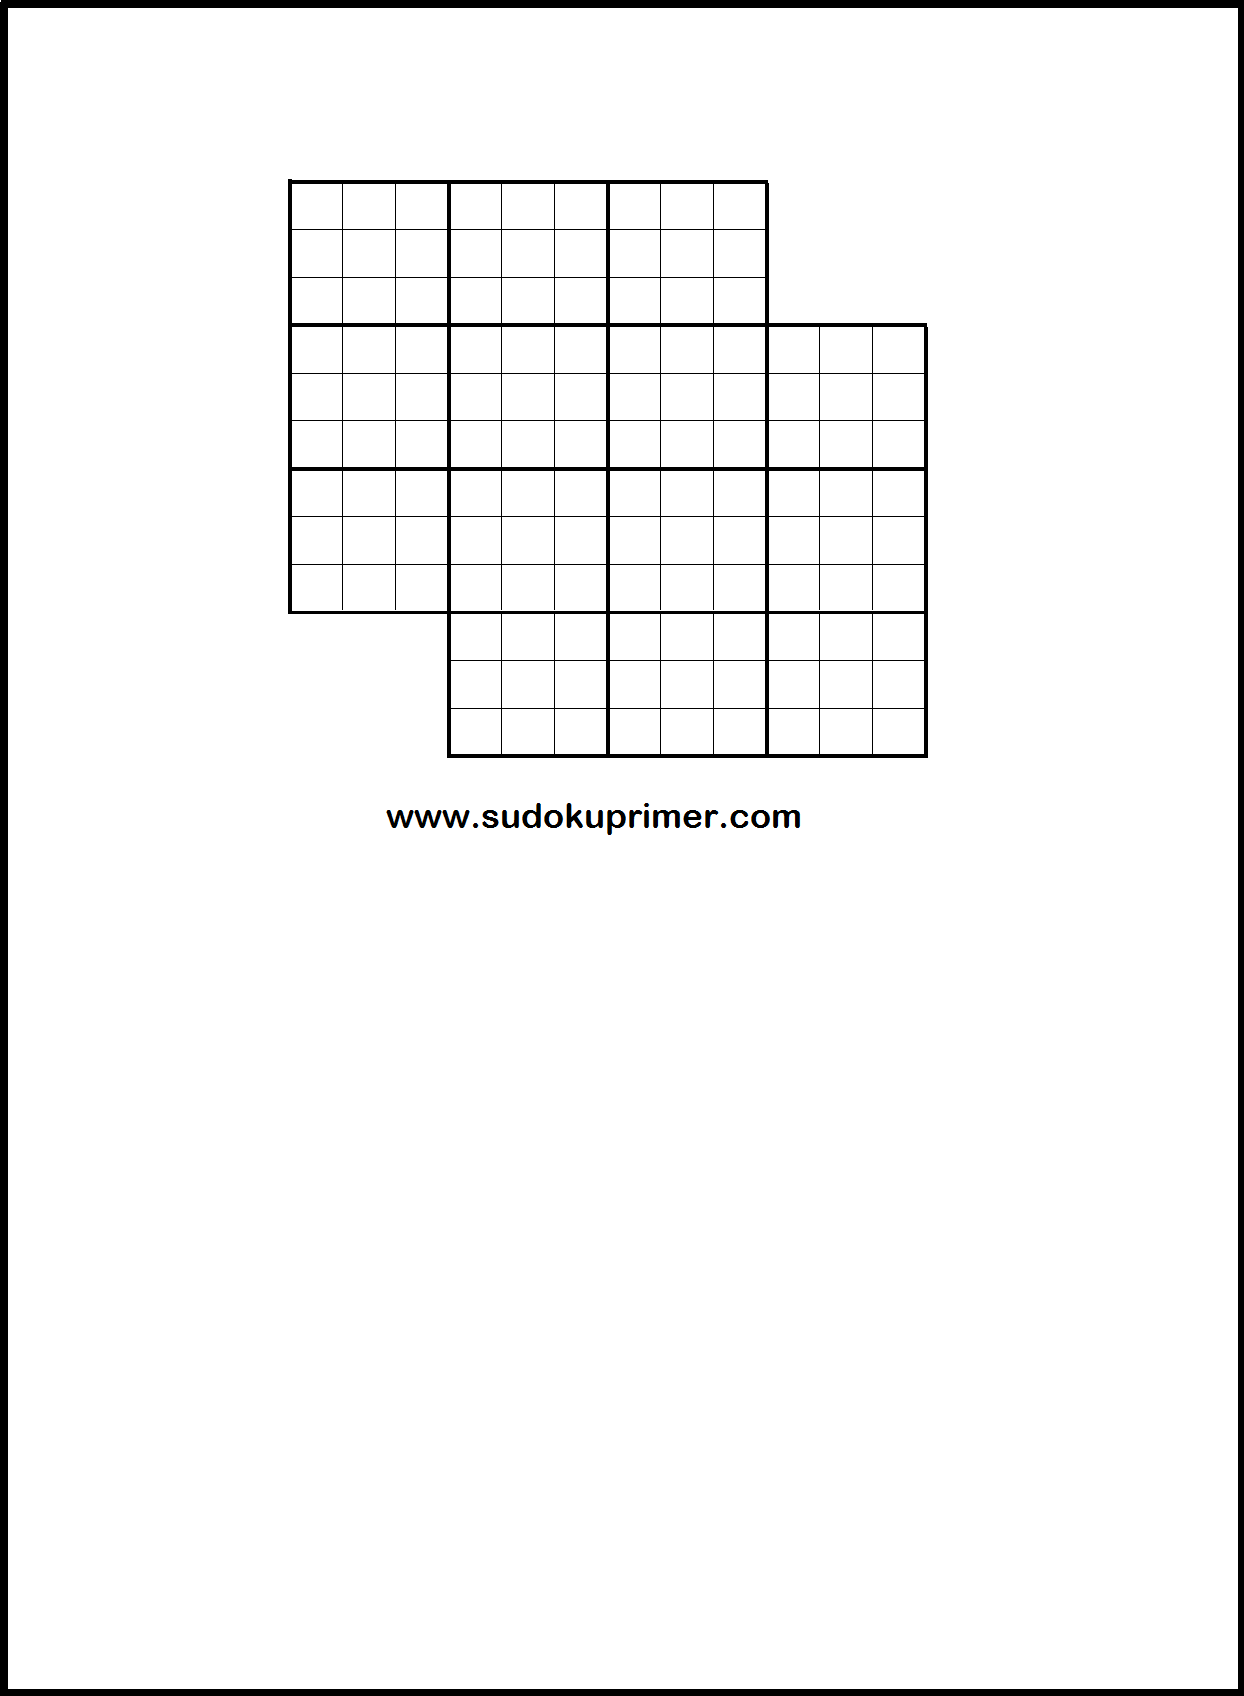 2 x 2 classic overlapping sudoku blank grid in .pdf format